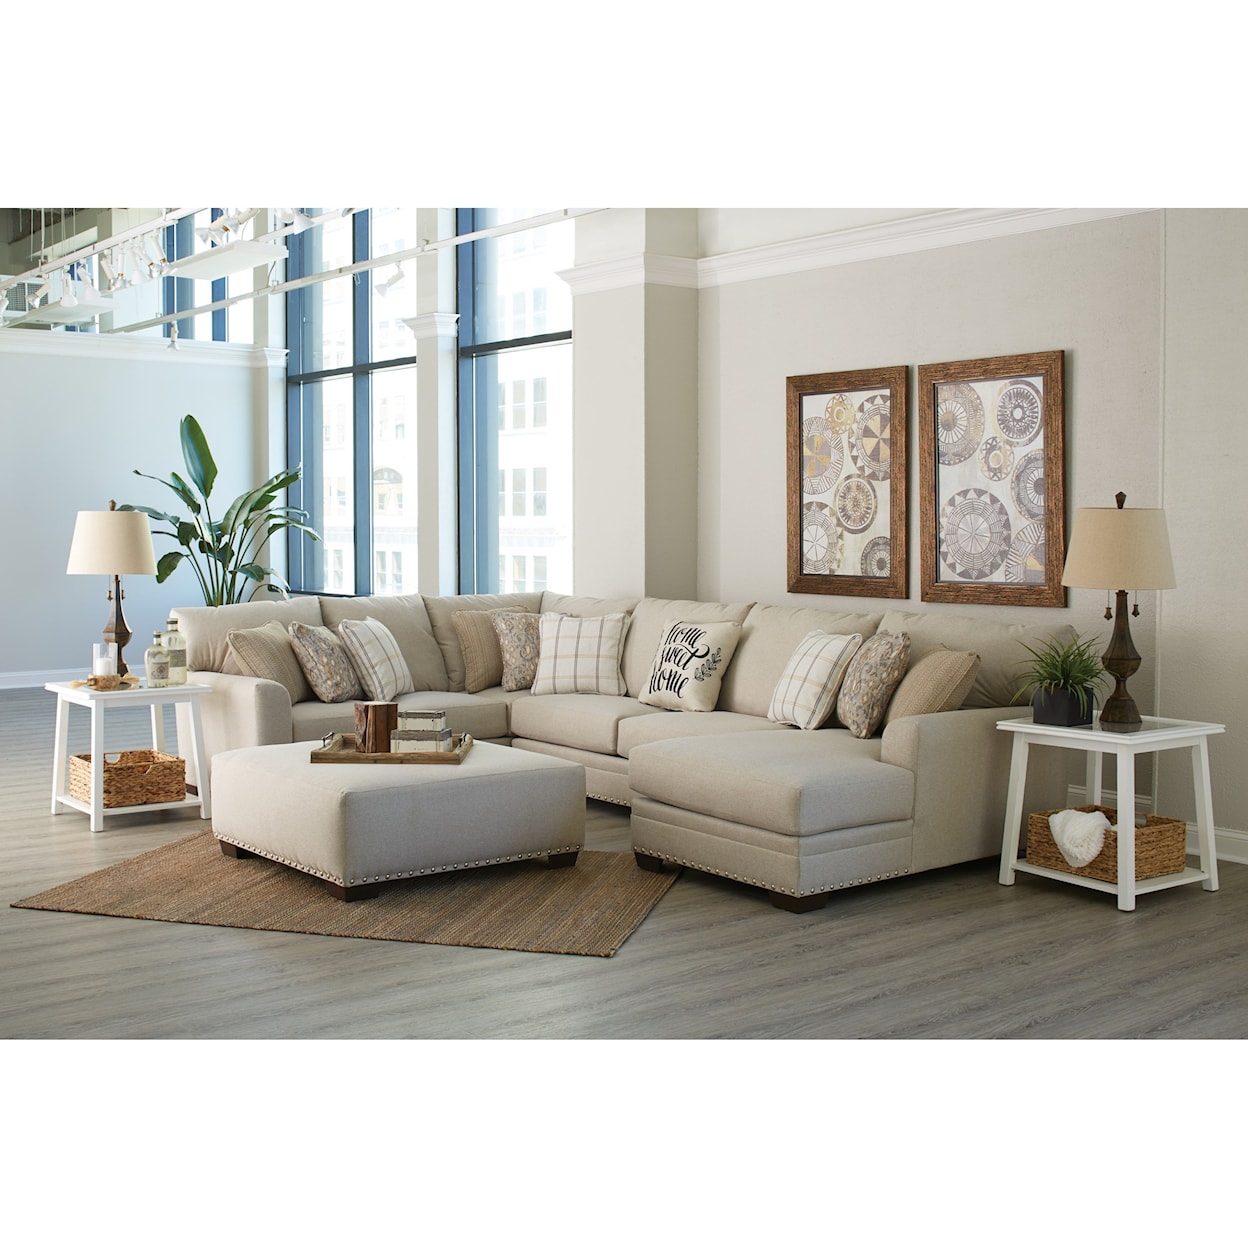 Jackson Furniture 4478 Middleton Last One at this Price-Includes Ottoman.